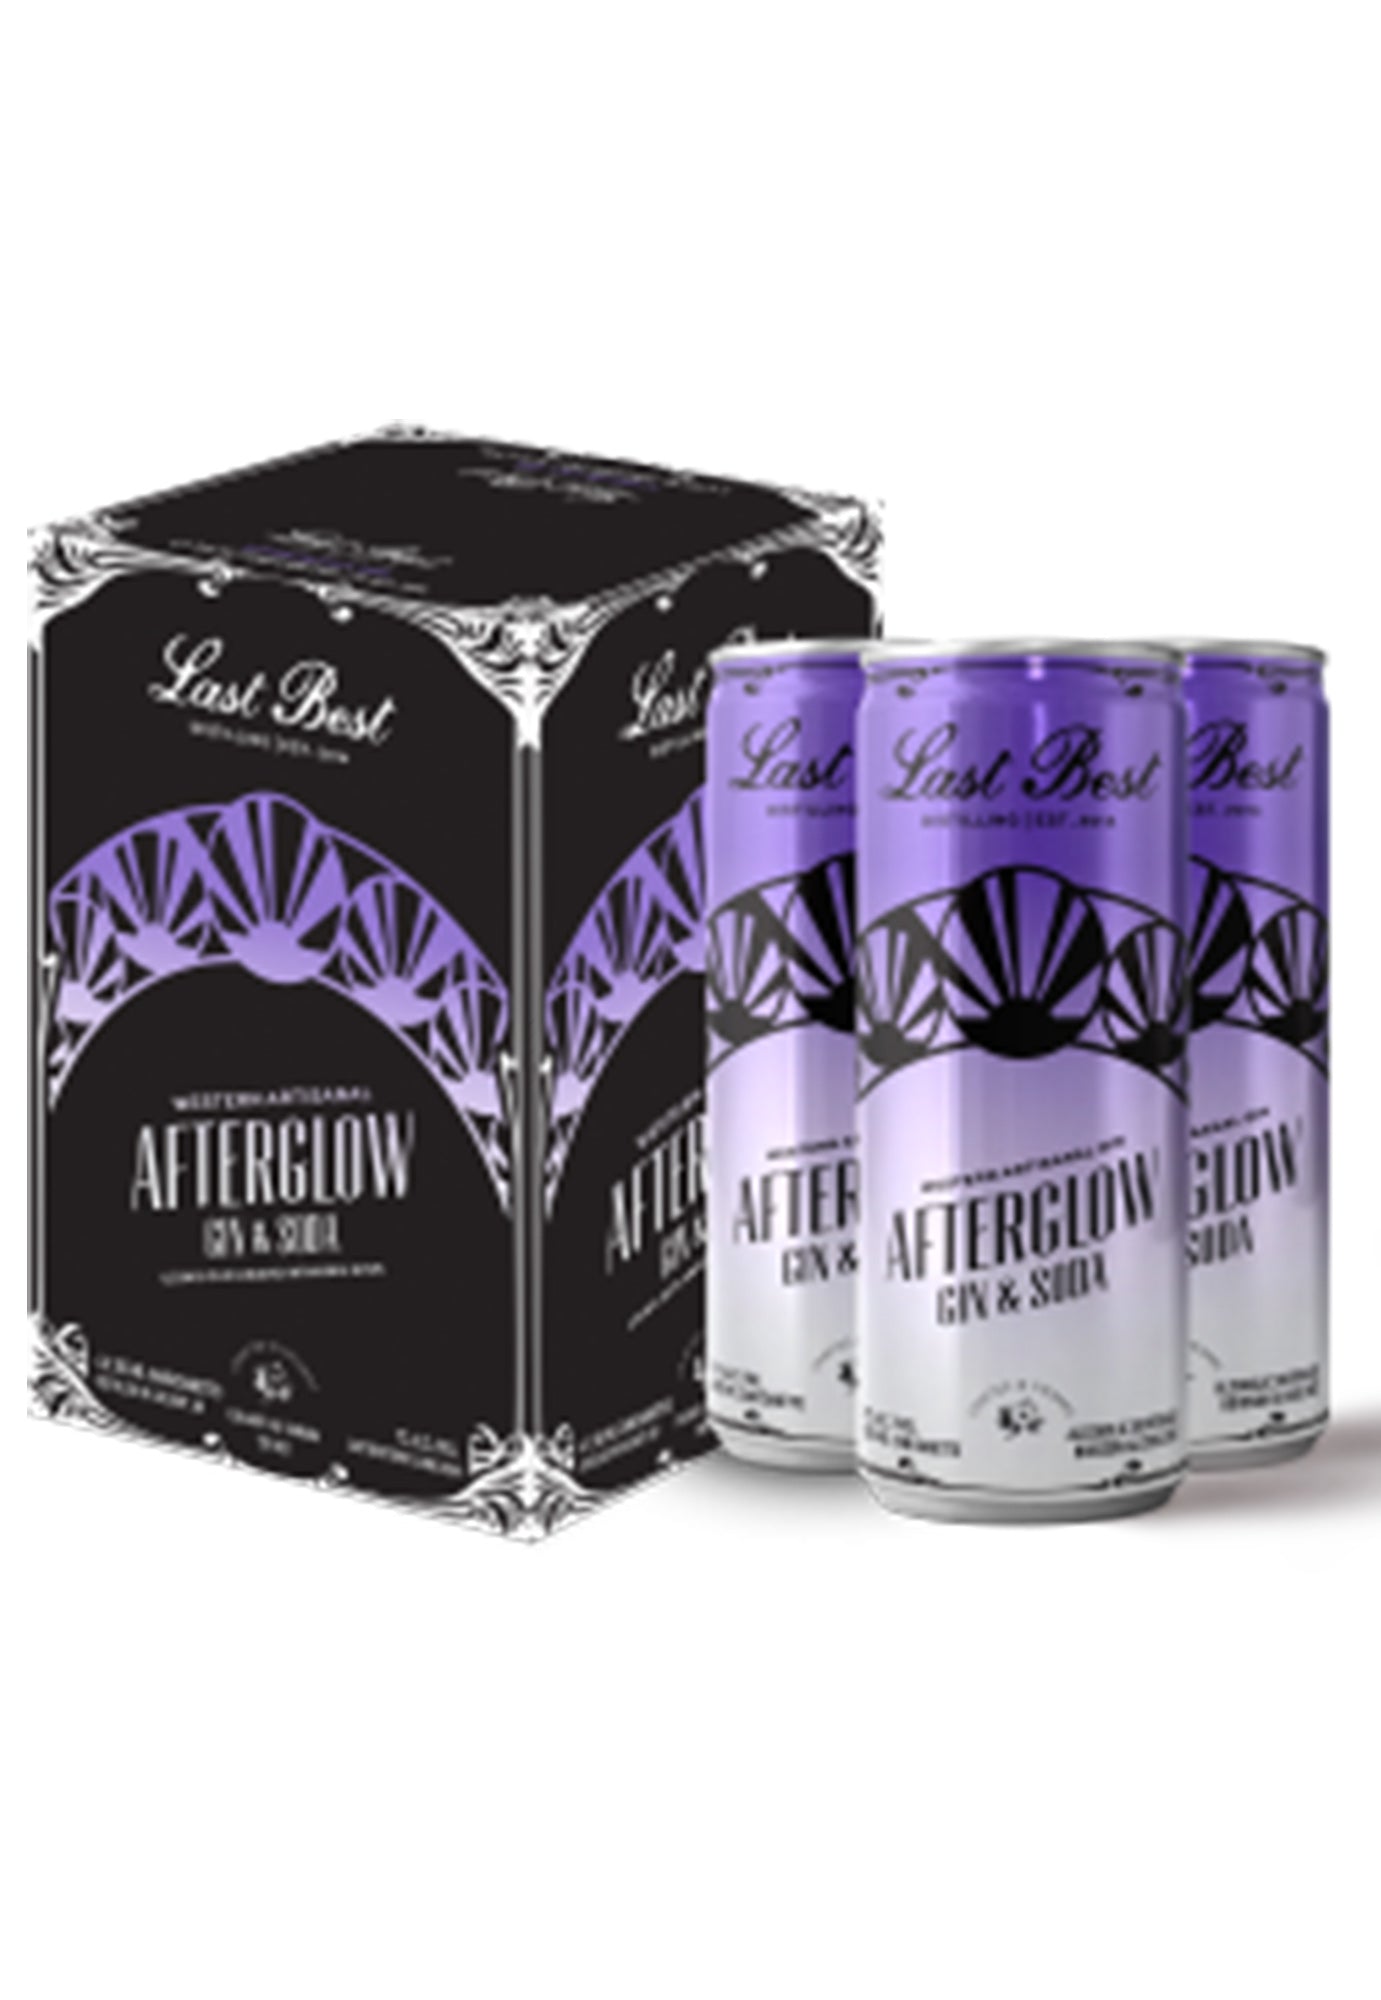 Last Best Afterglow Gin & Soda 355 ml - 4 Cans